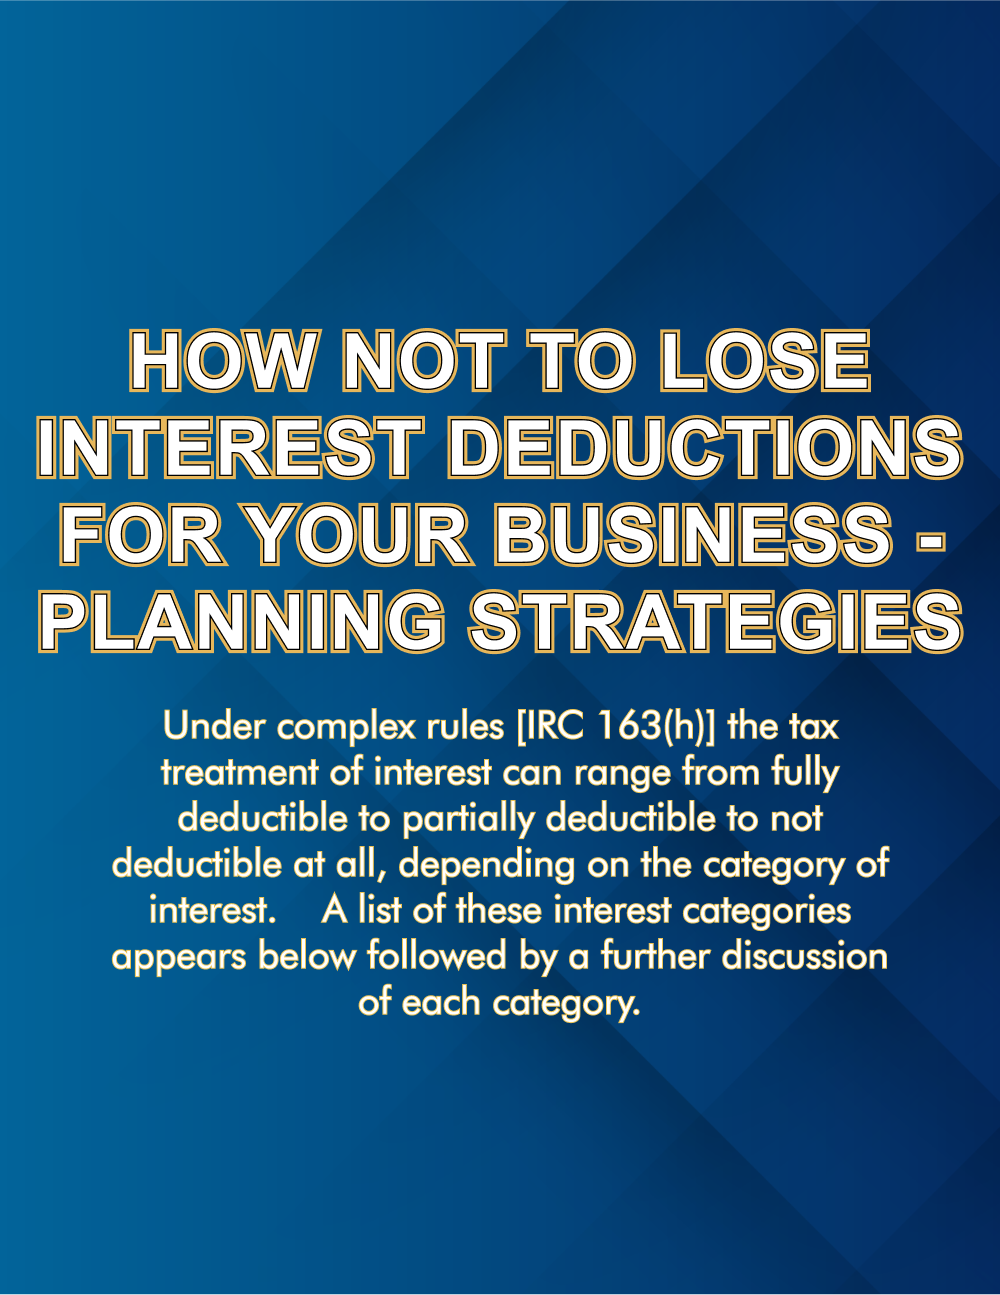 How Not to Lose Interest Deductions for Your Business -Planning Strategies